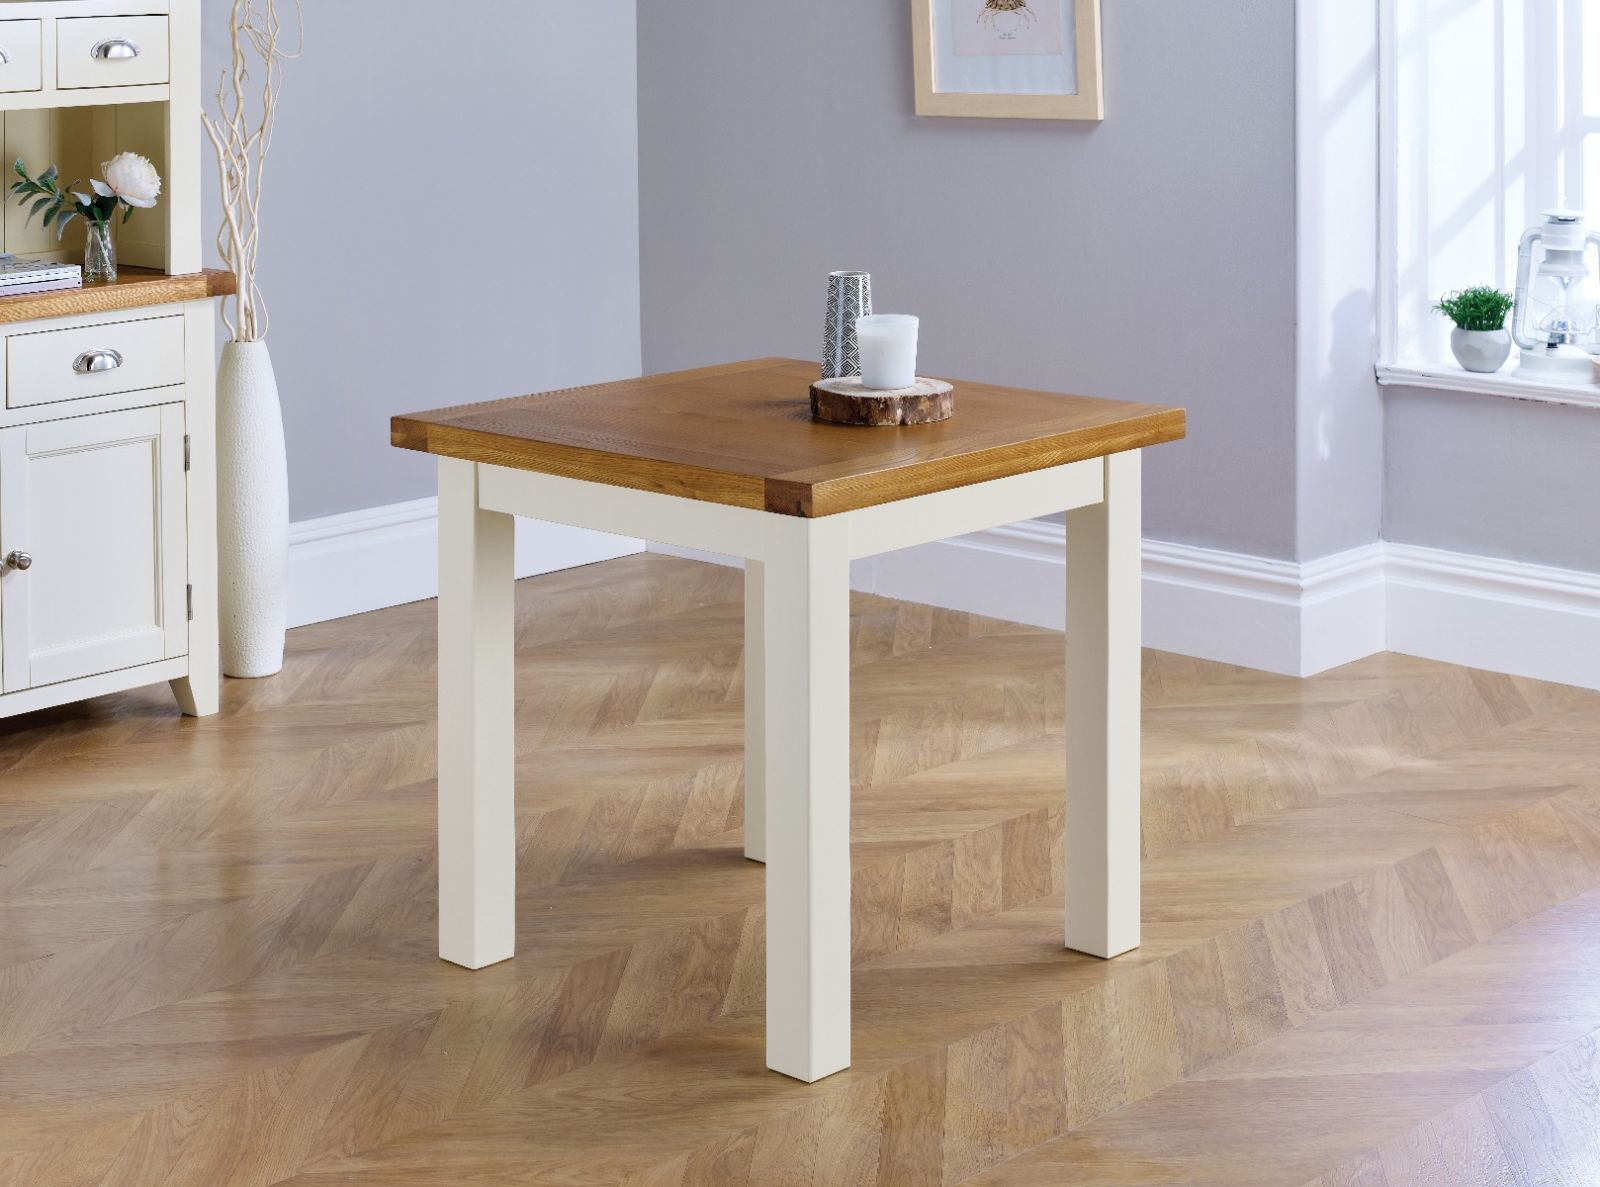 Country Oak 80cm Cream Painted Square Oak Dining Table / Desk - 20% OFF WINTER SALE